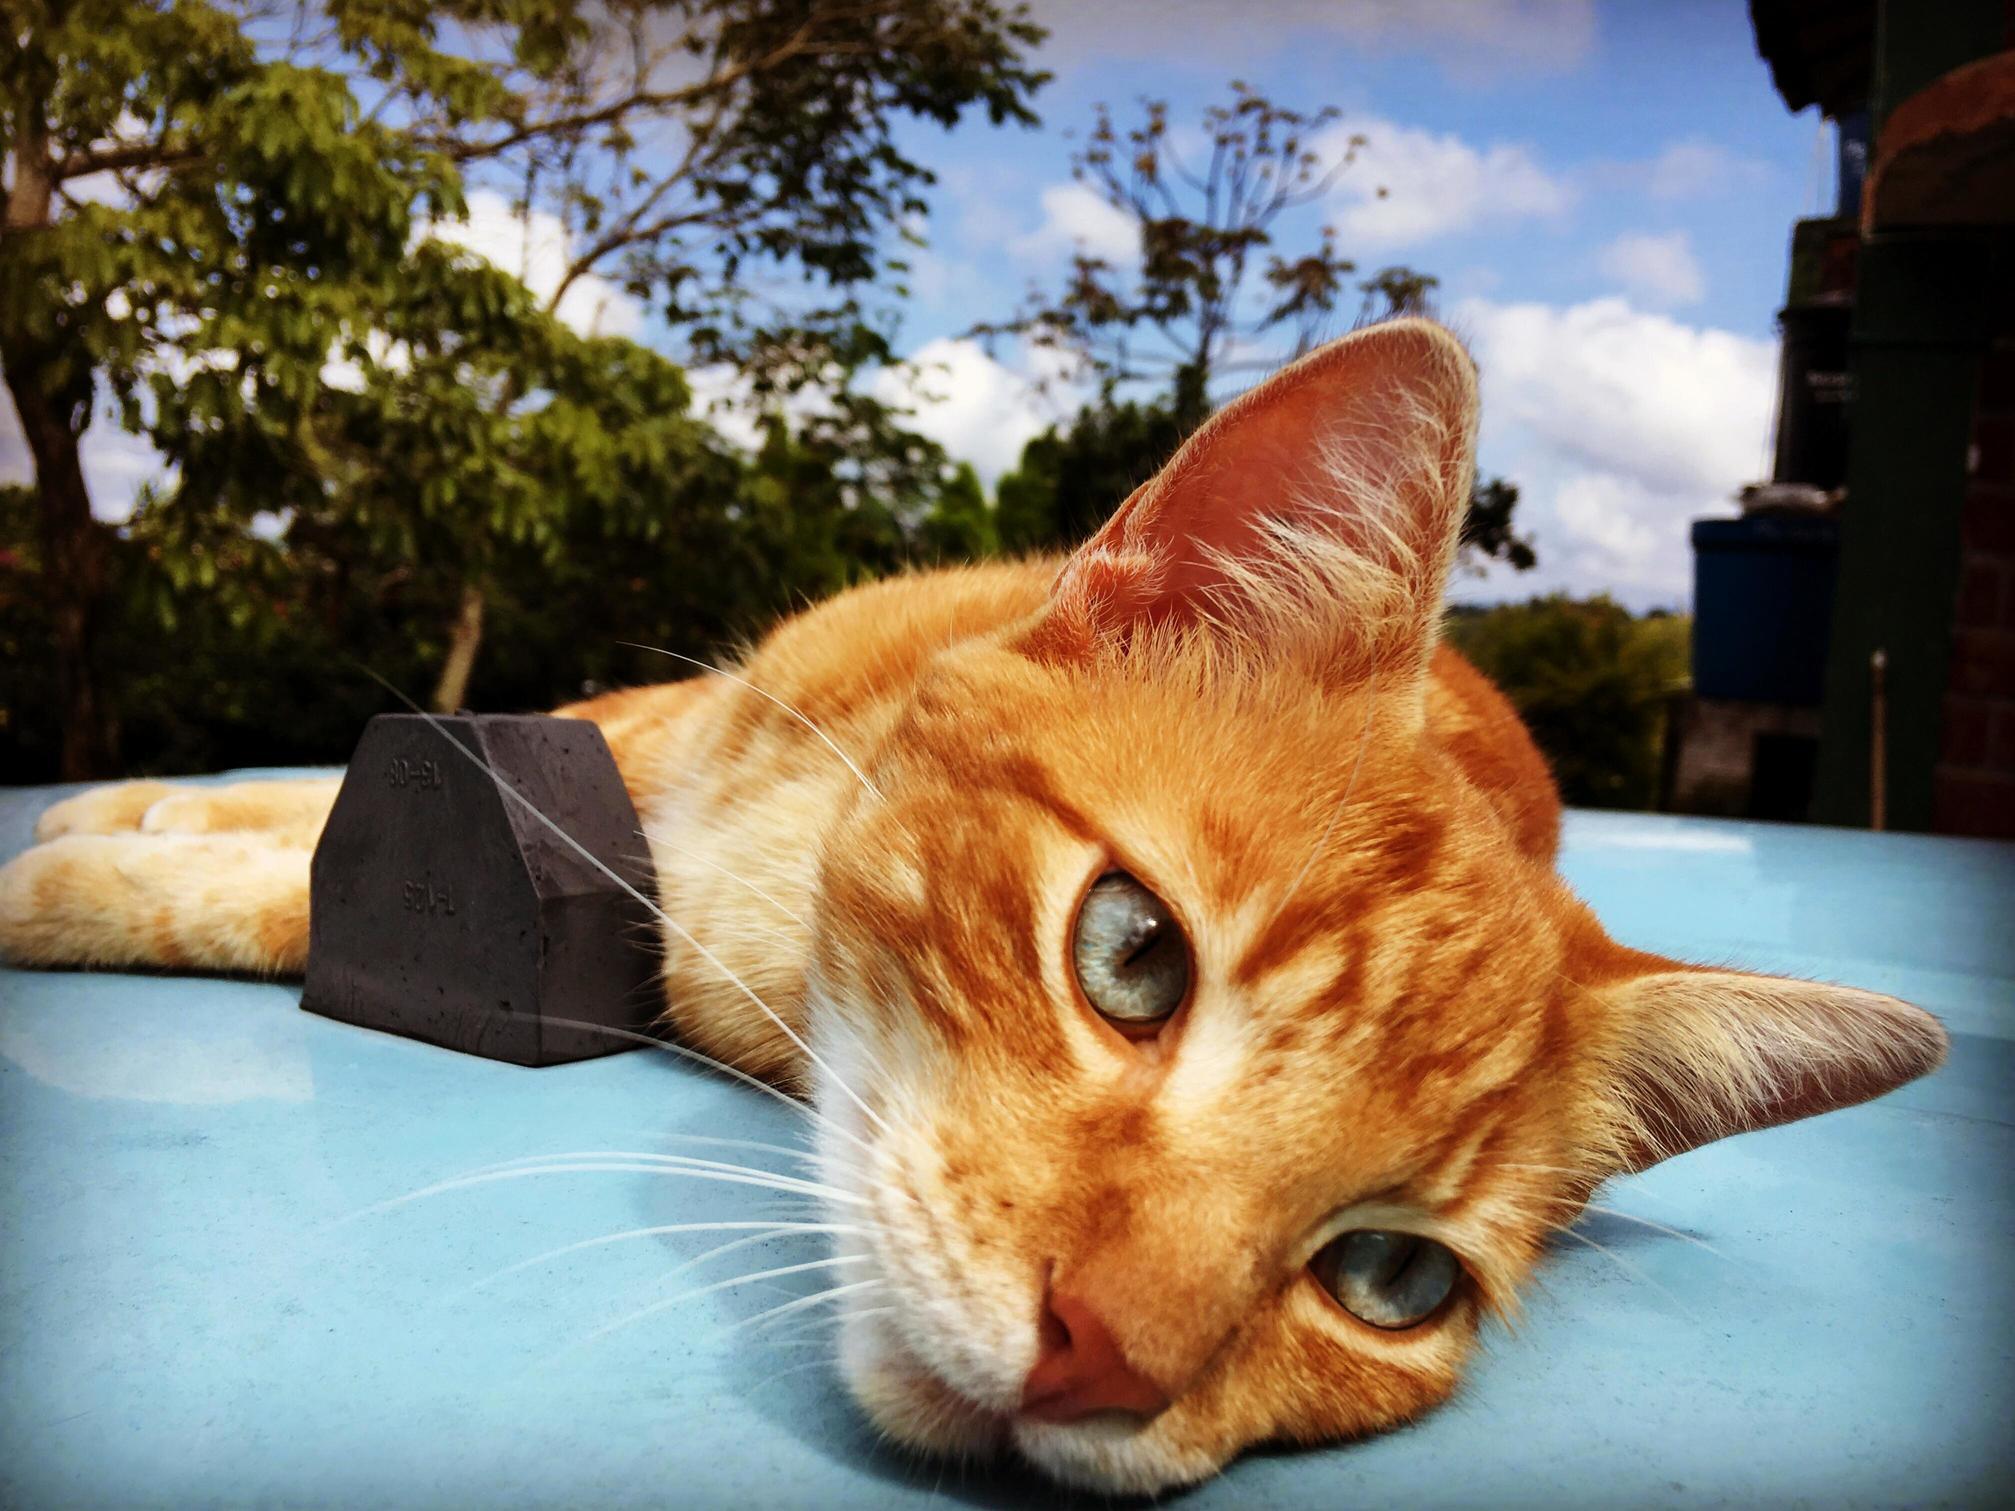 This is paul the cat. we made friends over a series of weeks while i worked at a hostel in colombia. he is a pretty chill cat.